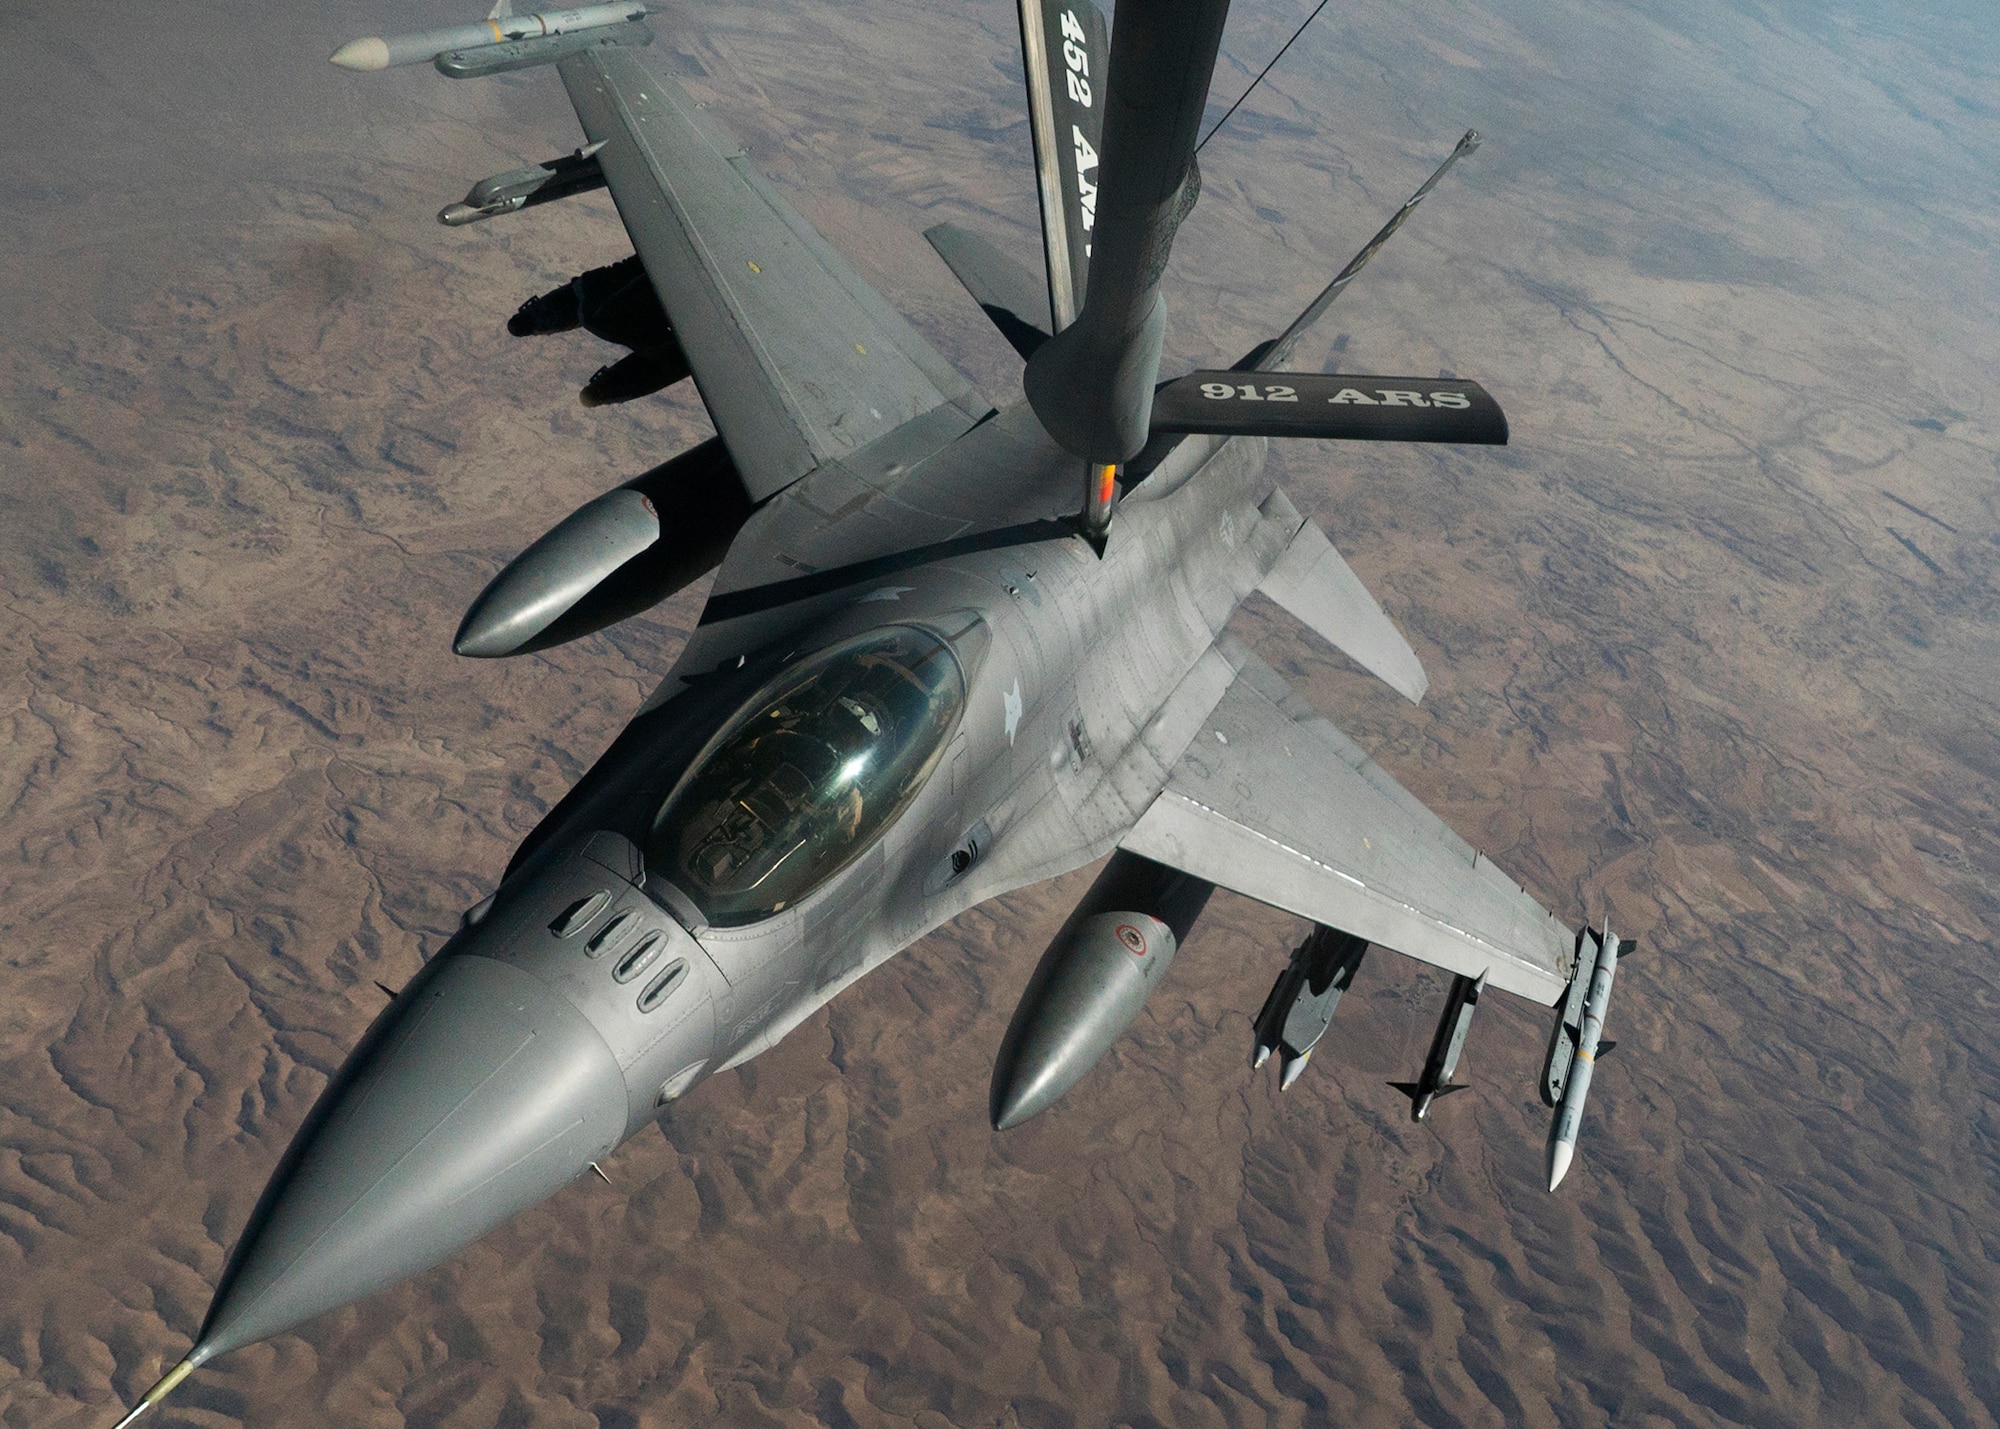 A U.S. Air Force F-16 Fighting Falcon from the 169th Fighter Wing, South Carolina National Guard receives in-flight fuel from a KC-135 Stratotanker assigned to the 28th Expeditionary Air Refueling Squadron during an aerial refueling mission in support of Operation Inherent Resolve over Iraq, Aug. 11, 2018. In conjunction with partner forces, Combined Joint Task Force - Operation Inherent Resolve defeats ISIS in designated areas of Iraq and Syria and sets conditions for follow-on operations to increase regional stability. (U.S. Air Force photo by Master Sgt. Burt Traynor)